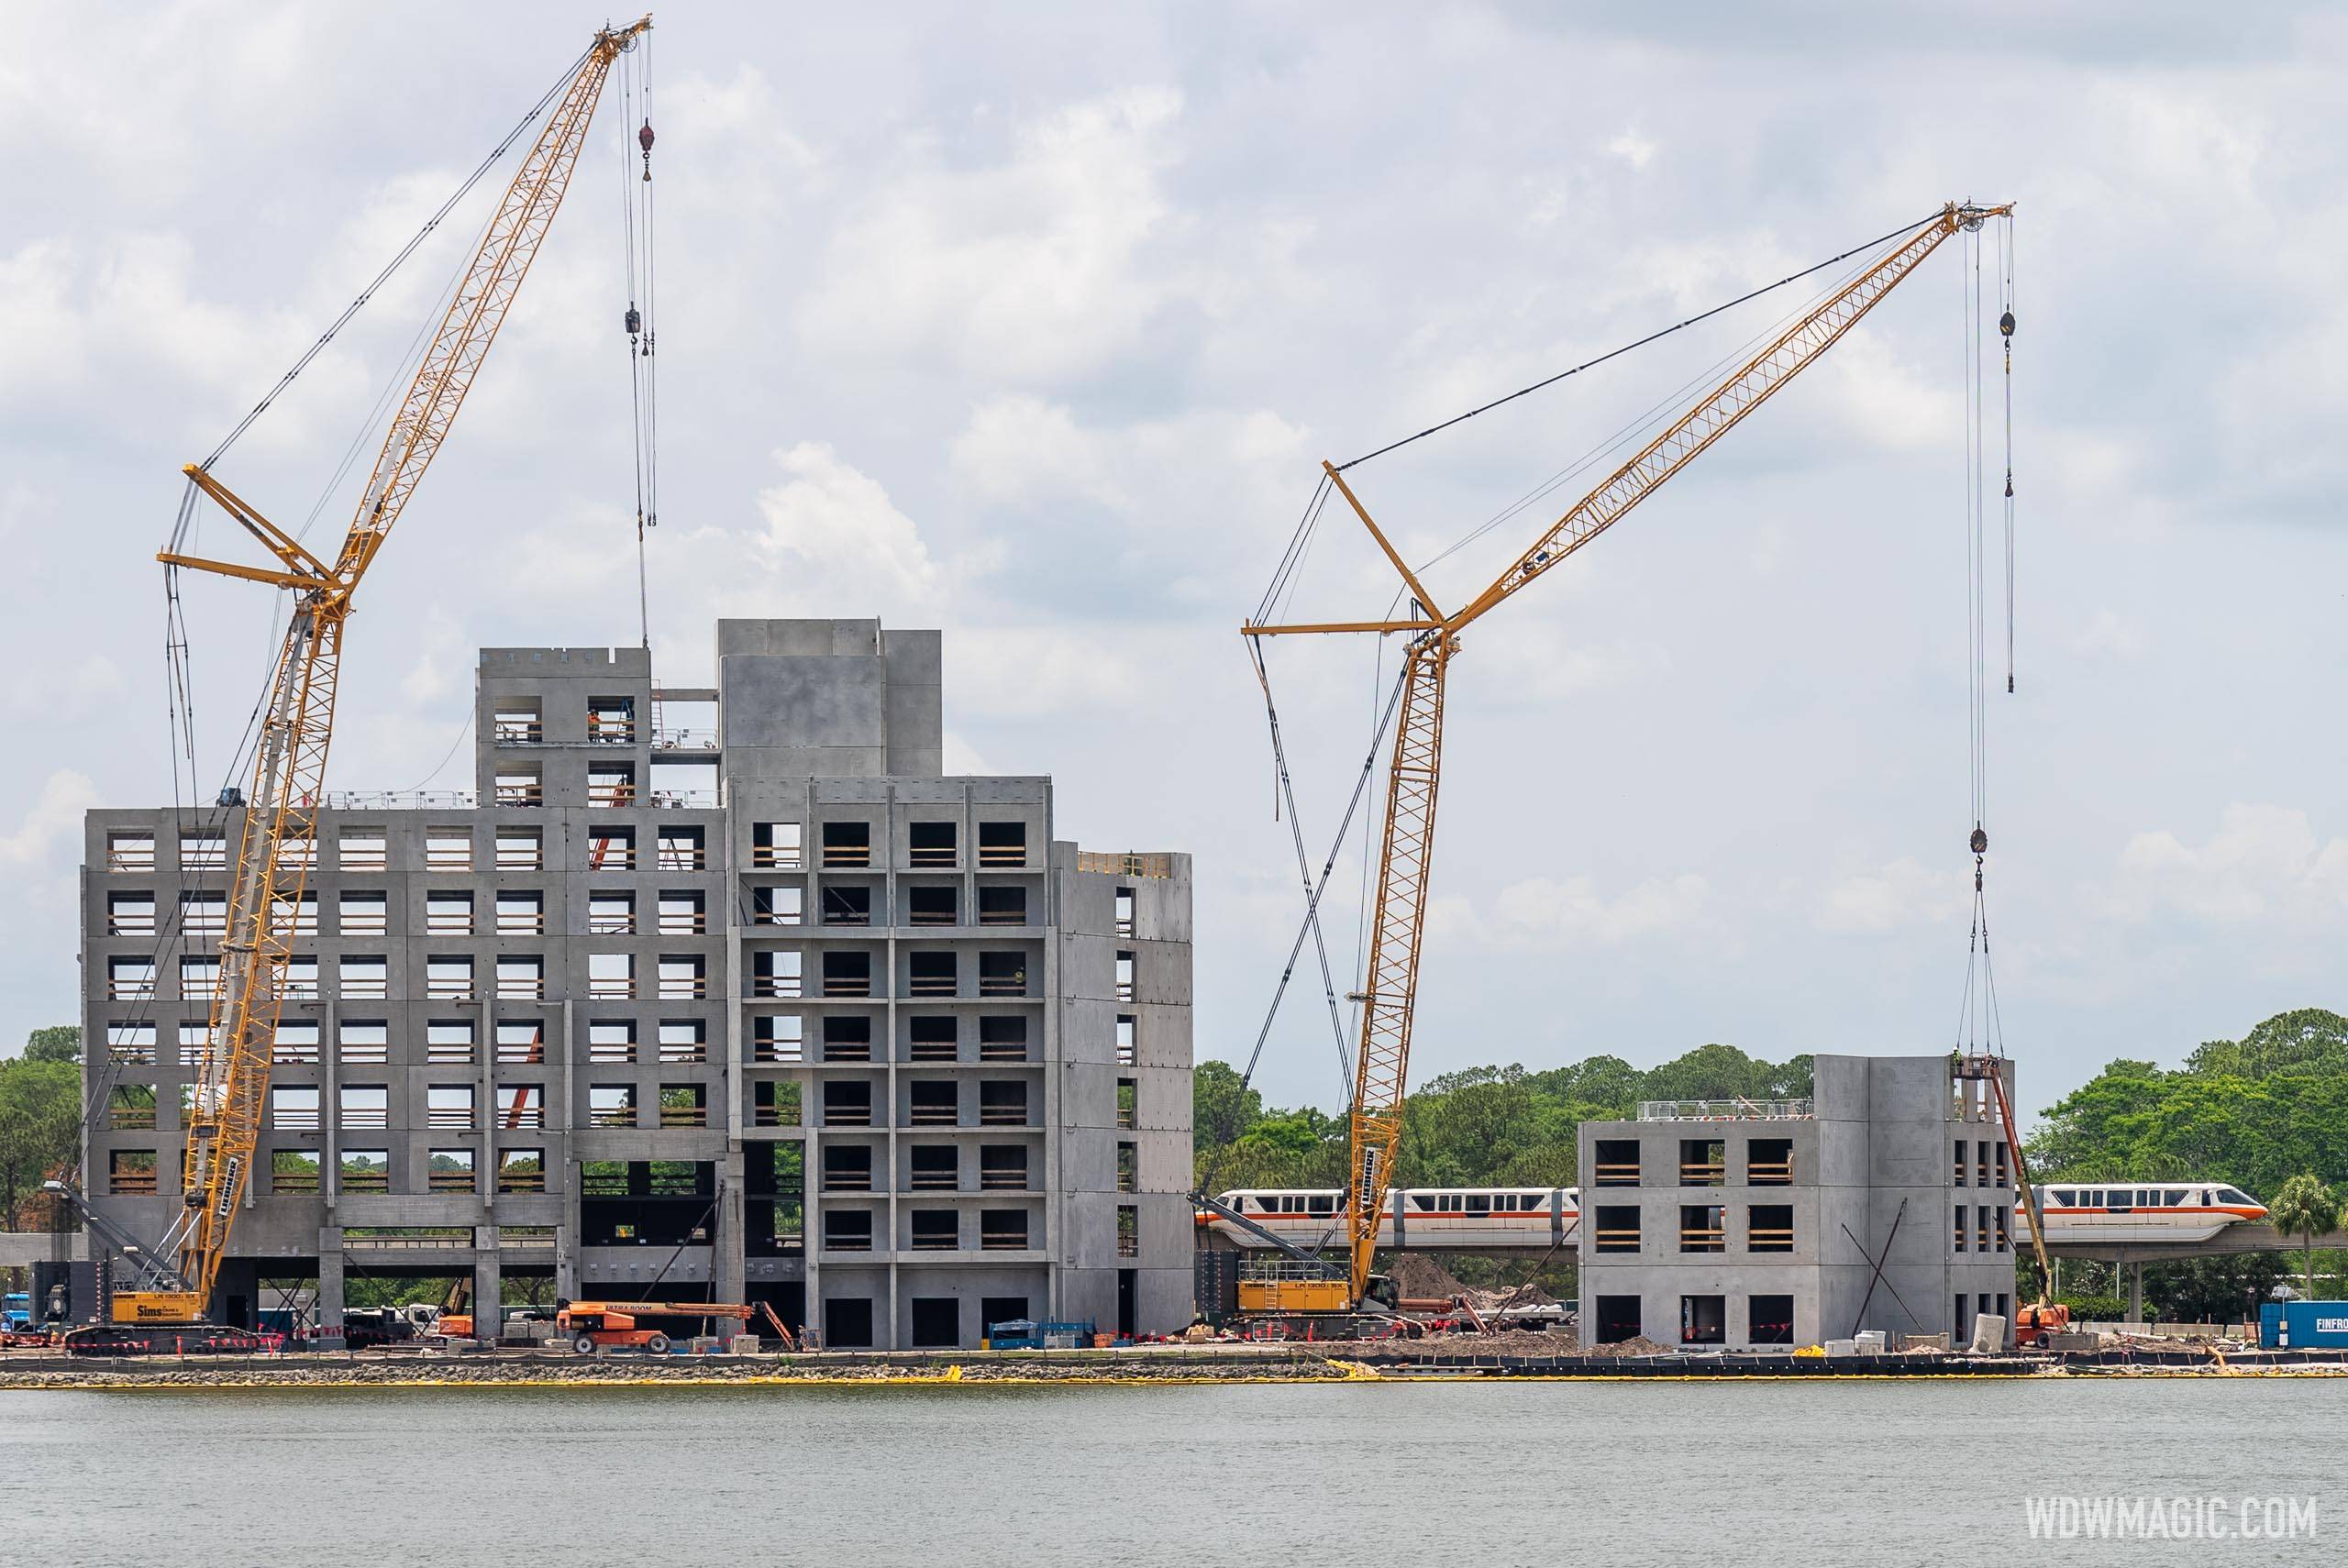 Construction update from the new Disney Vacation Club tower at Disney's Polynesian Village Resort